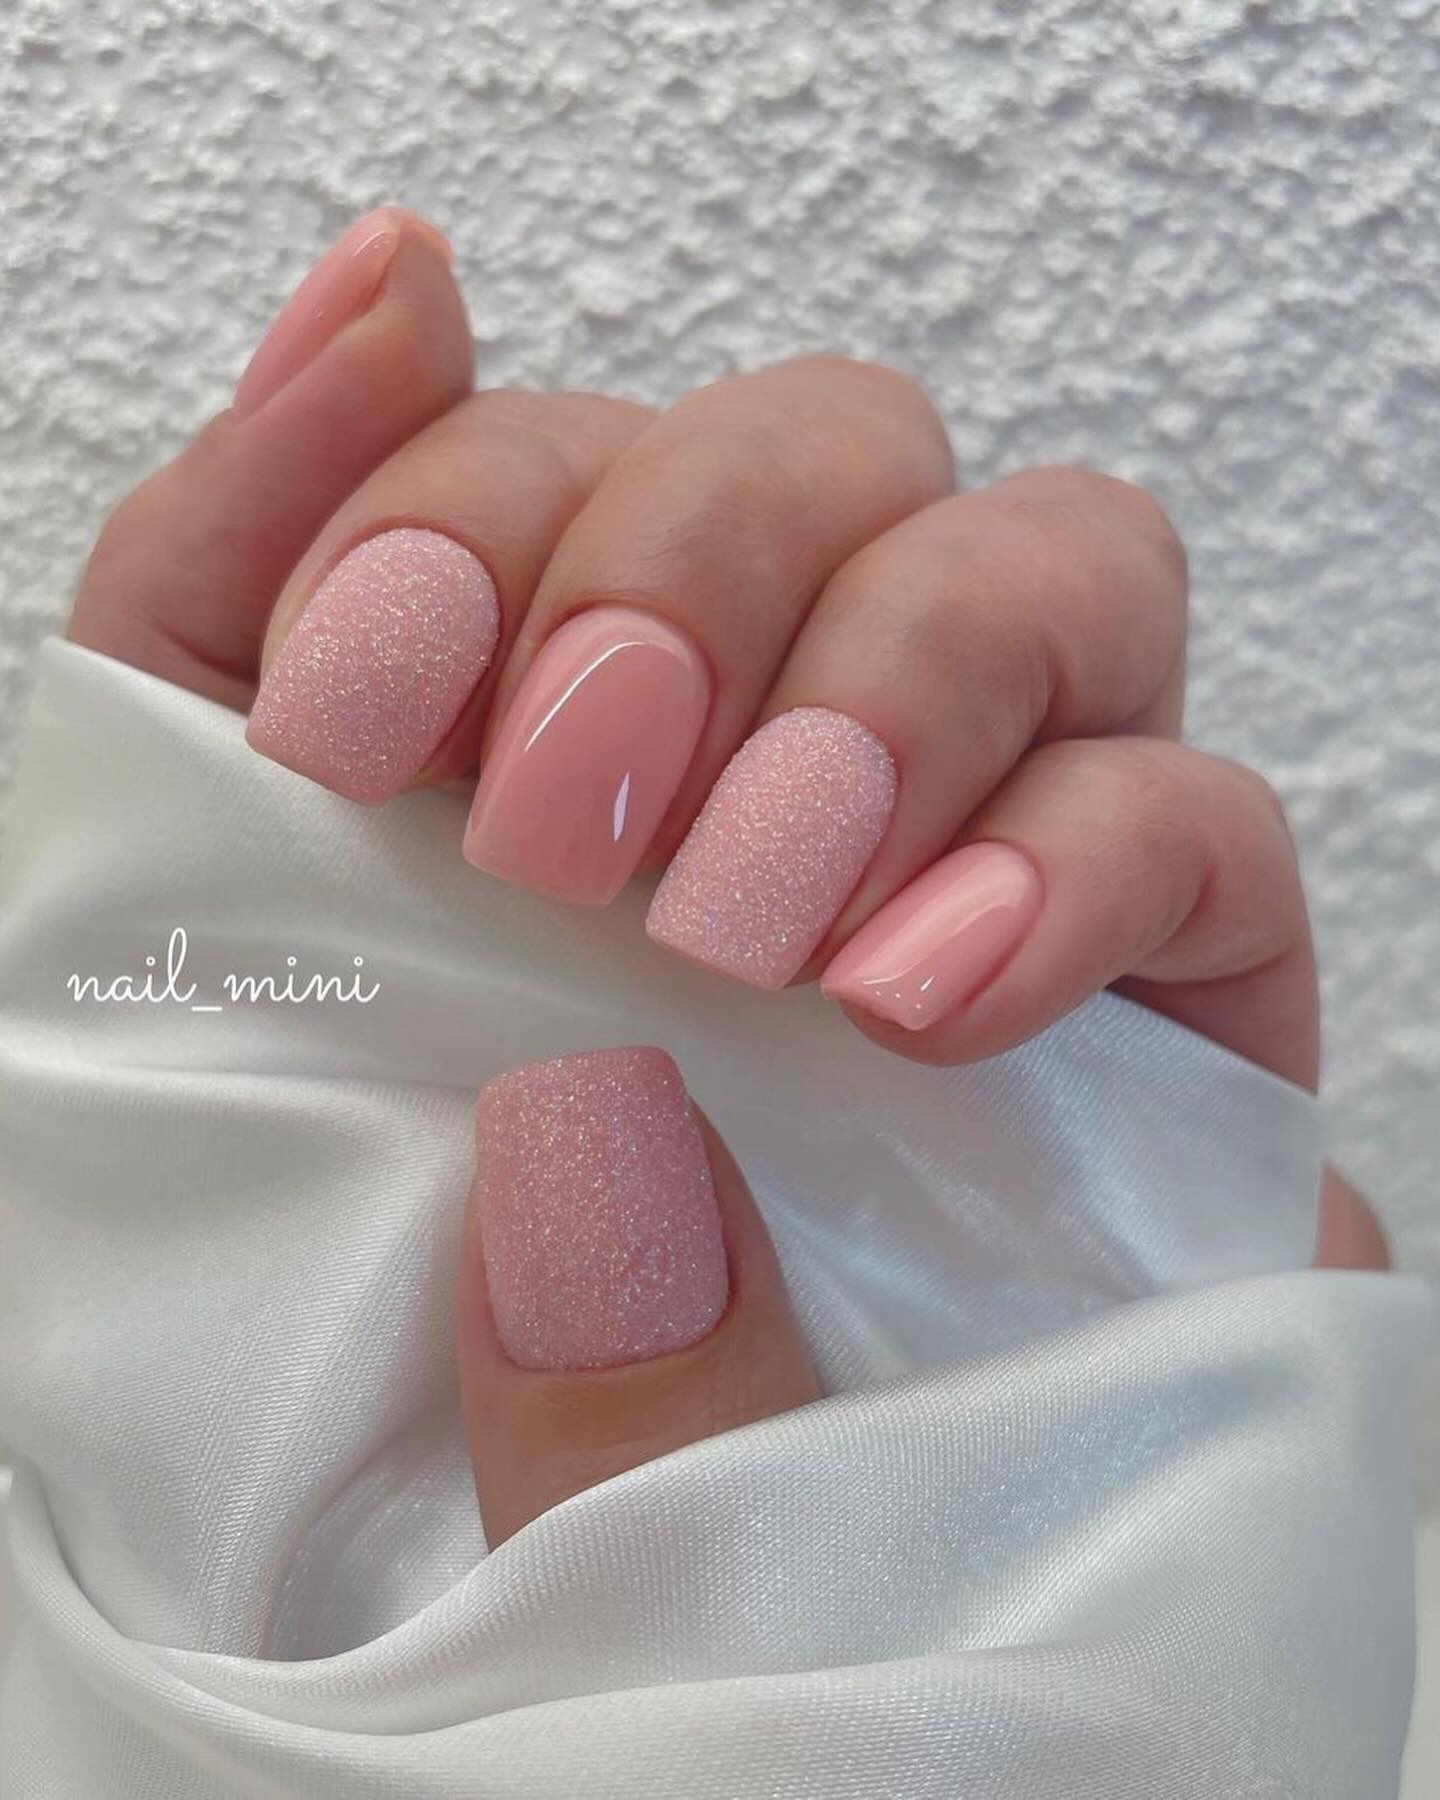 100+ Short Nail Designs You’ll Want To Try This Year images 25